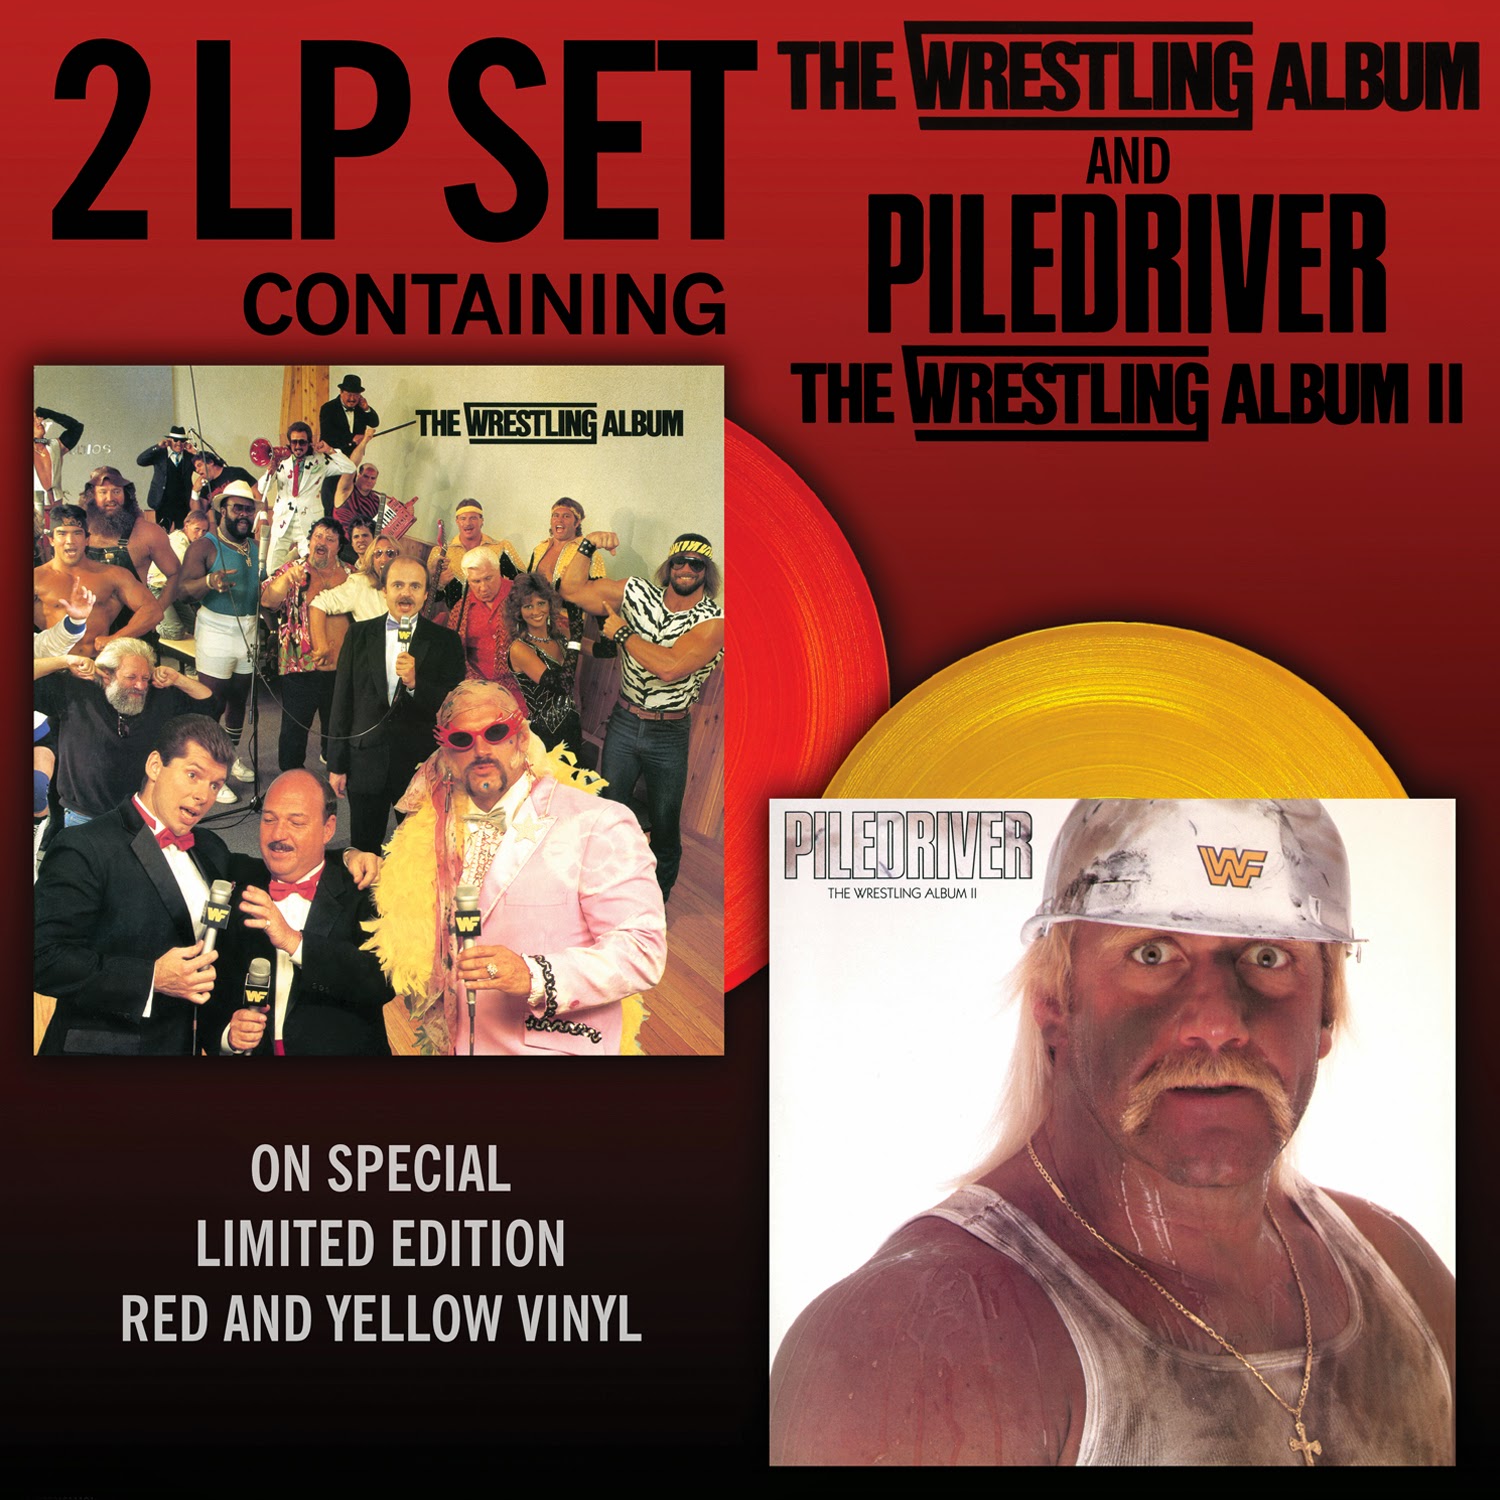 Record Store Day 2015 Exclusive WWE The Wrestling Album & Piledriver: The Wrestling Album 2 Double LP Colored Vinyl Records